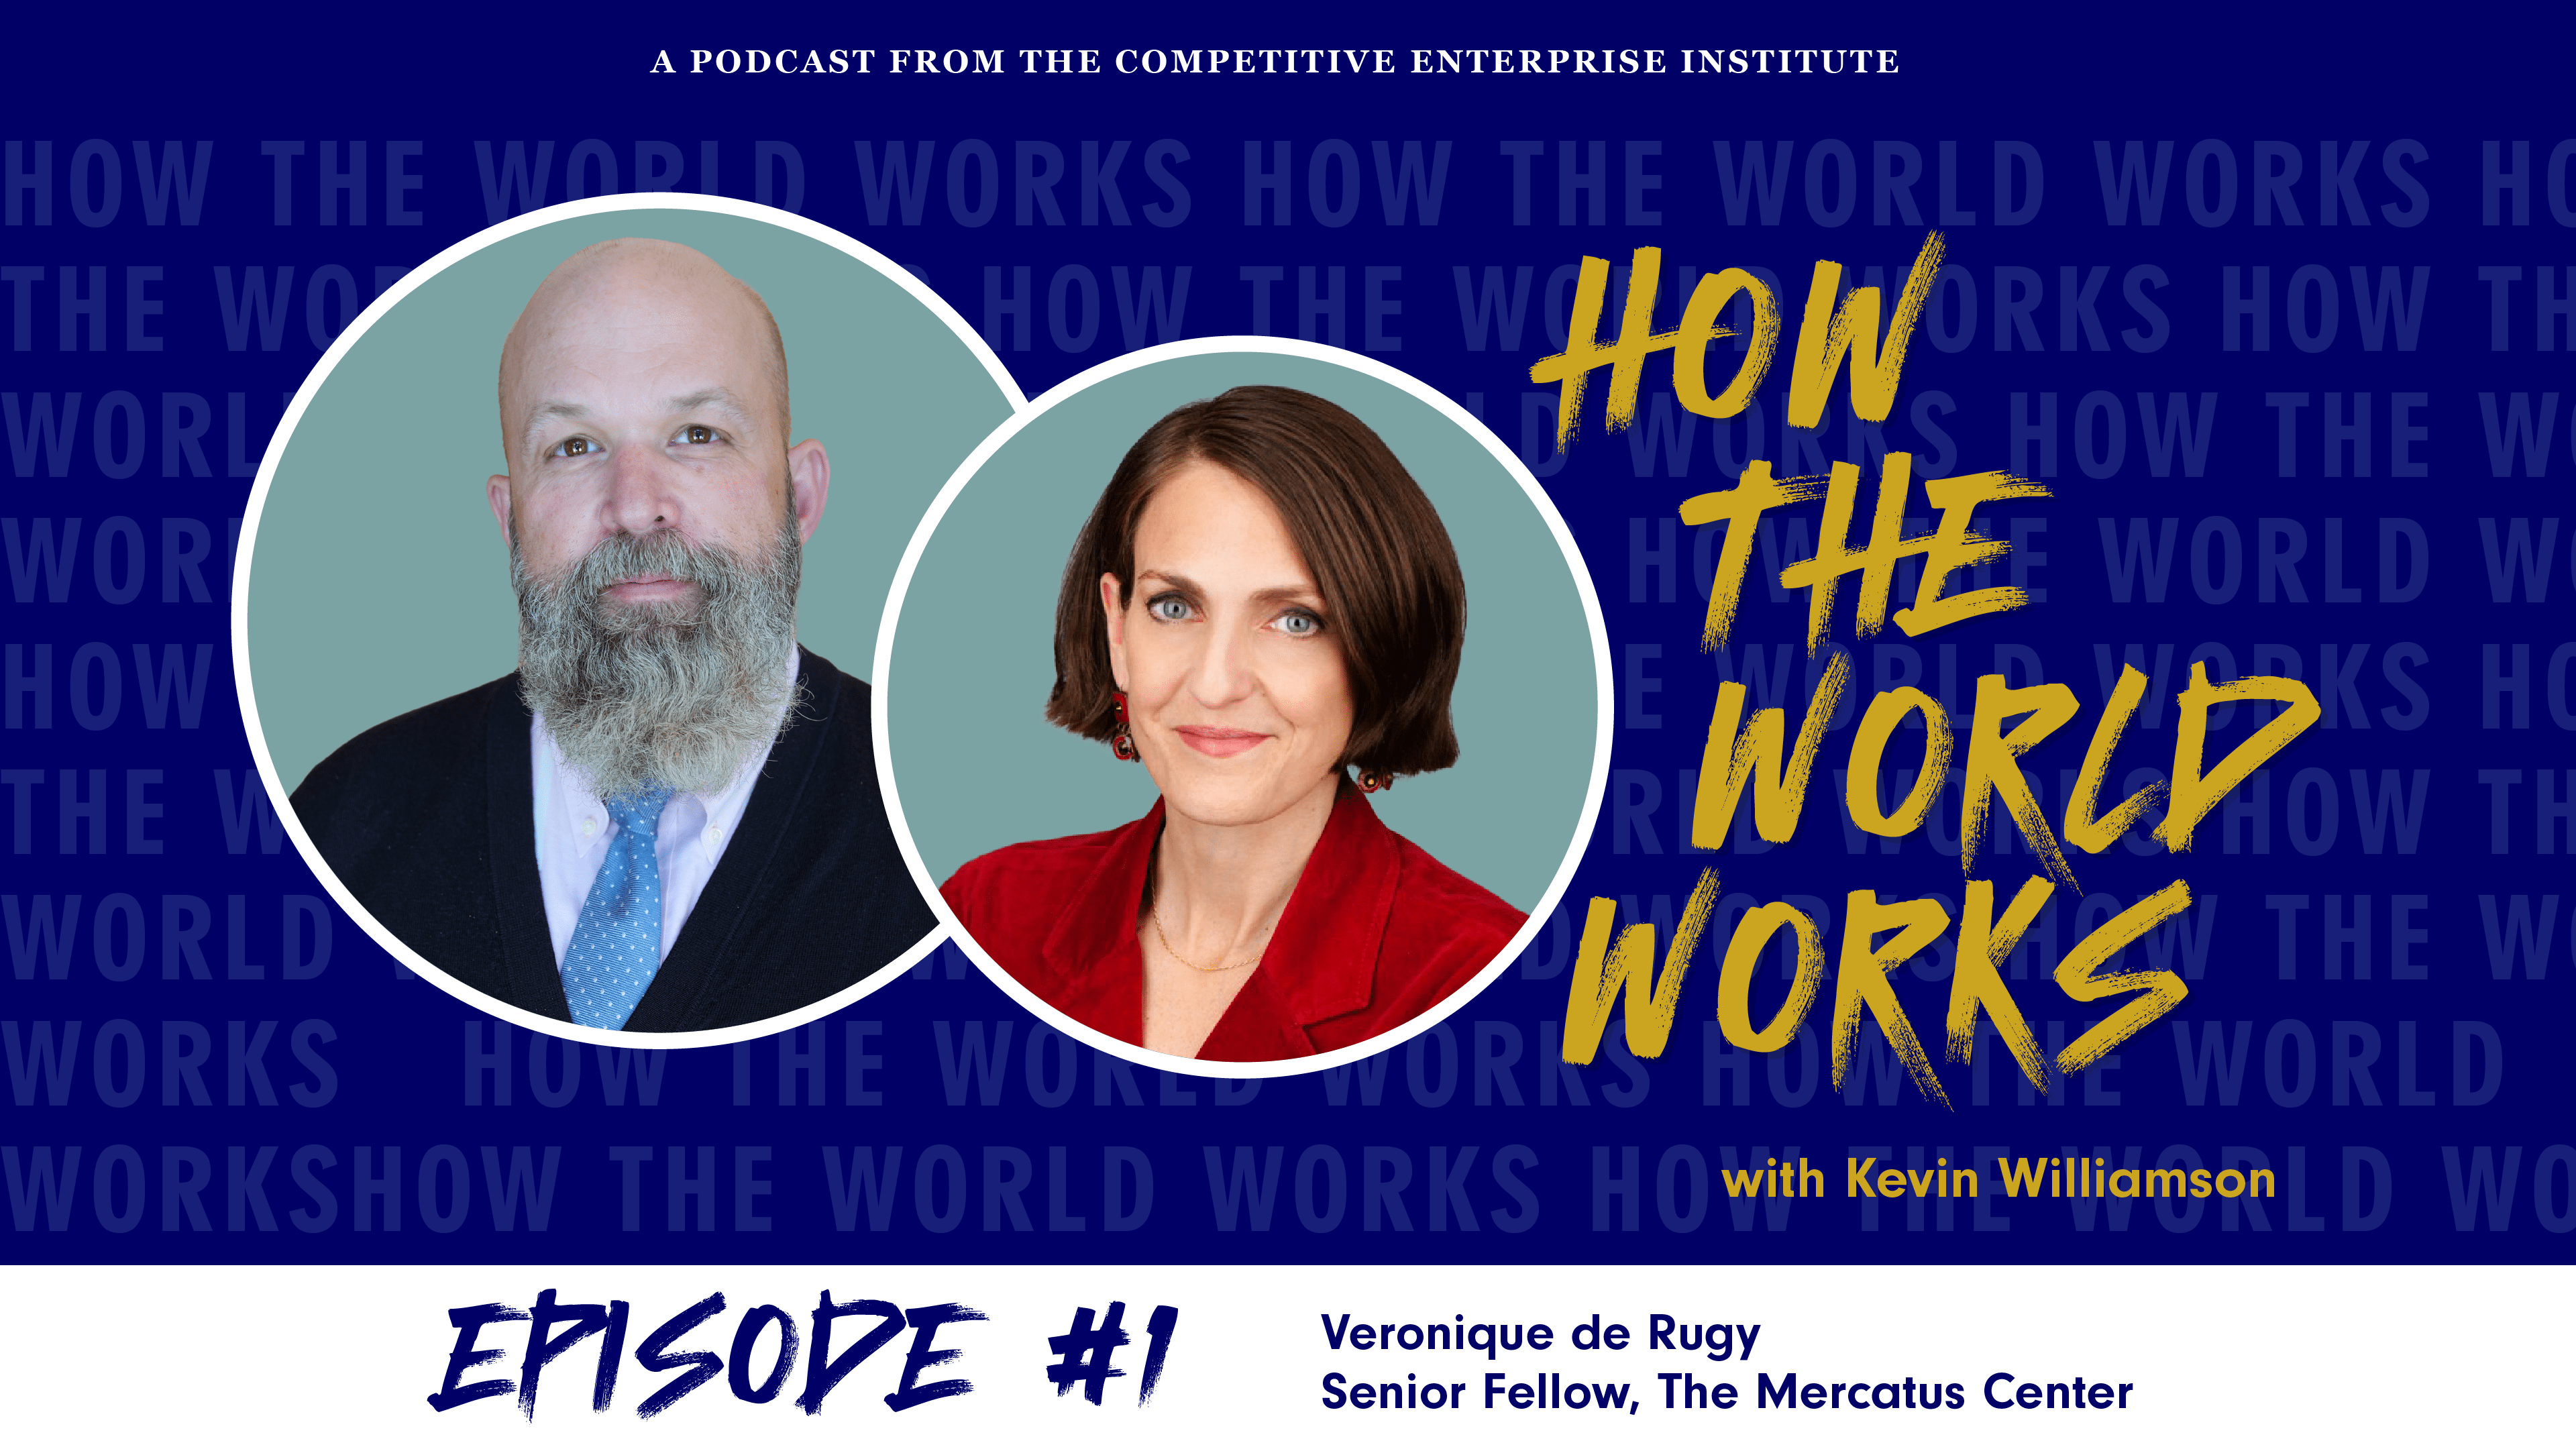 How the World Works Podcast with Guest Veronique De Rugy